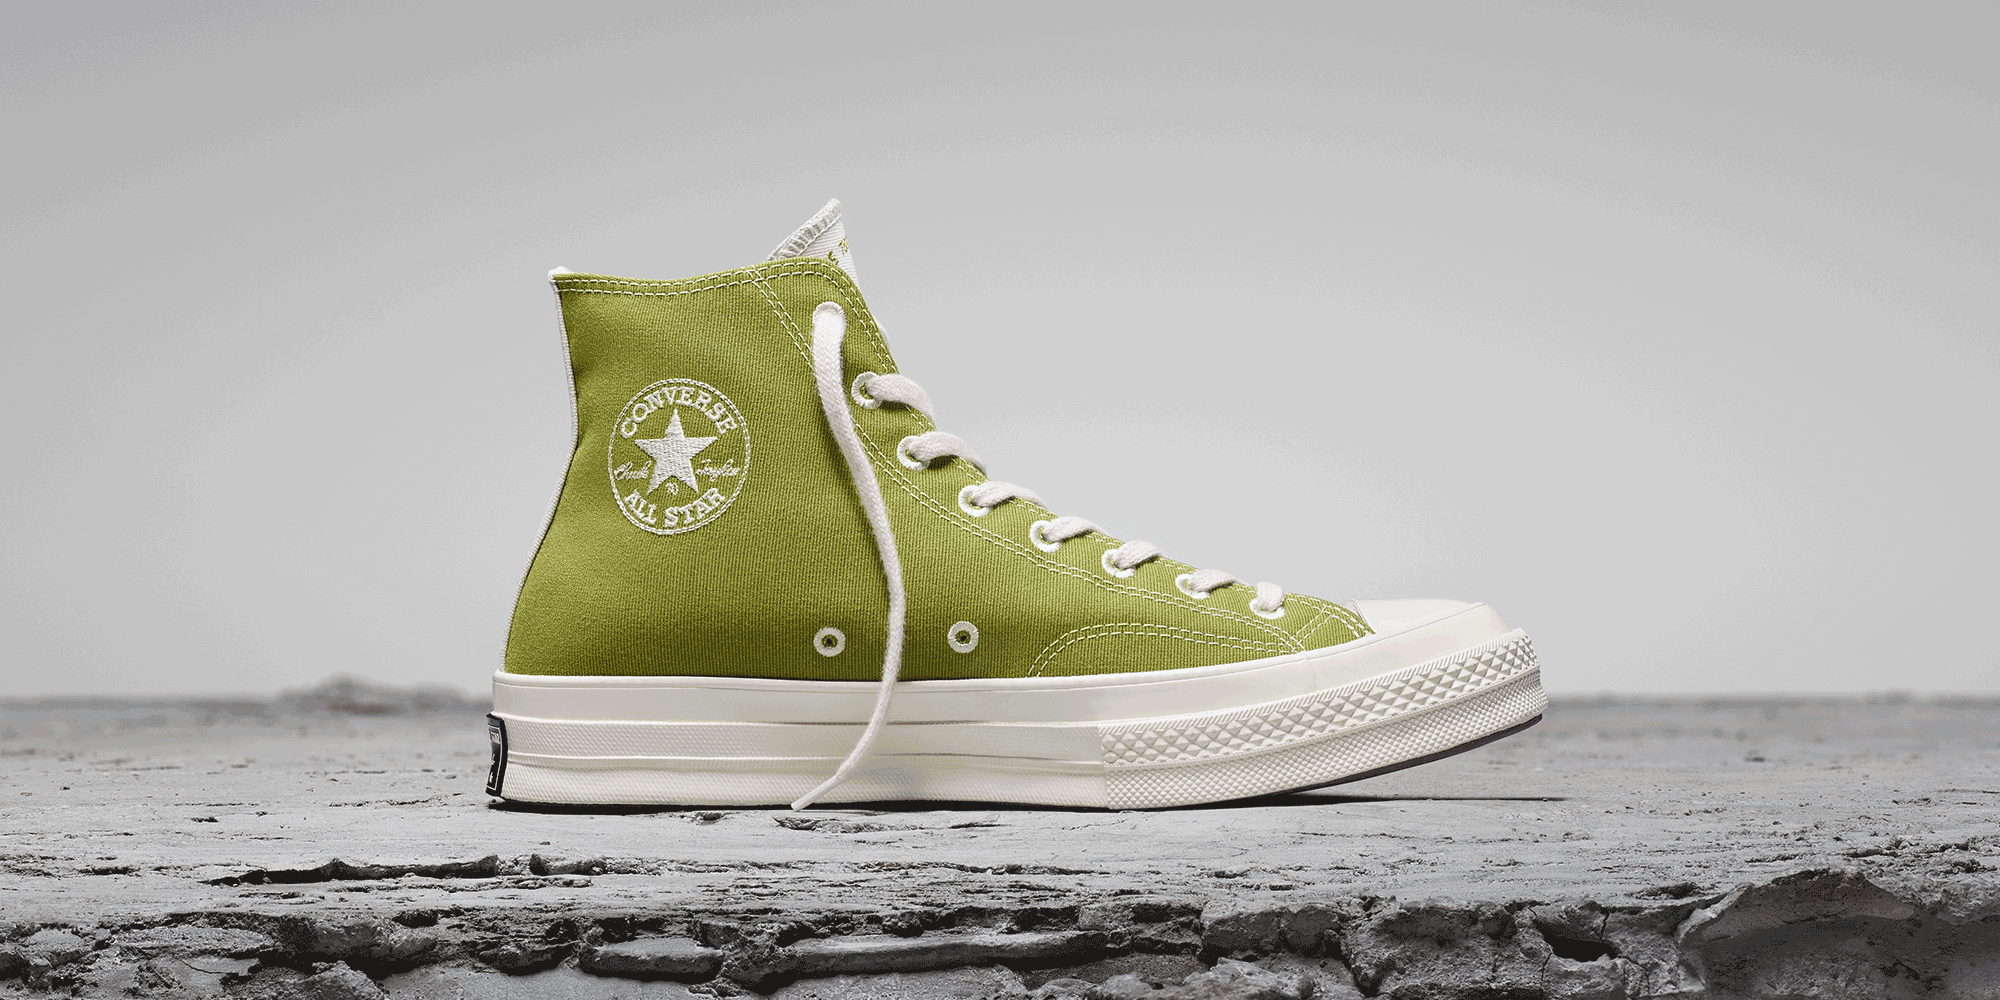 A Pair Of Converse Renew Canvas And Promote Sustainable Manufacturing